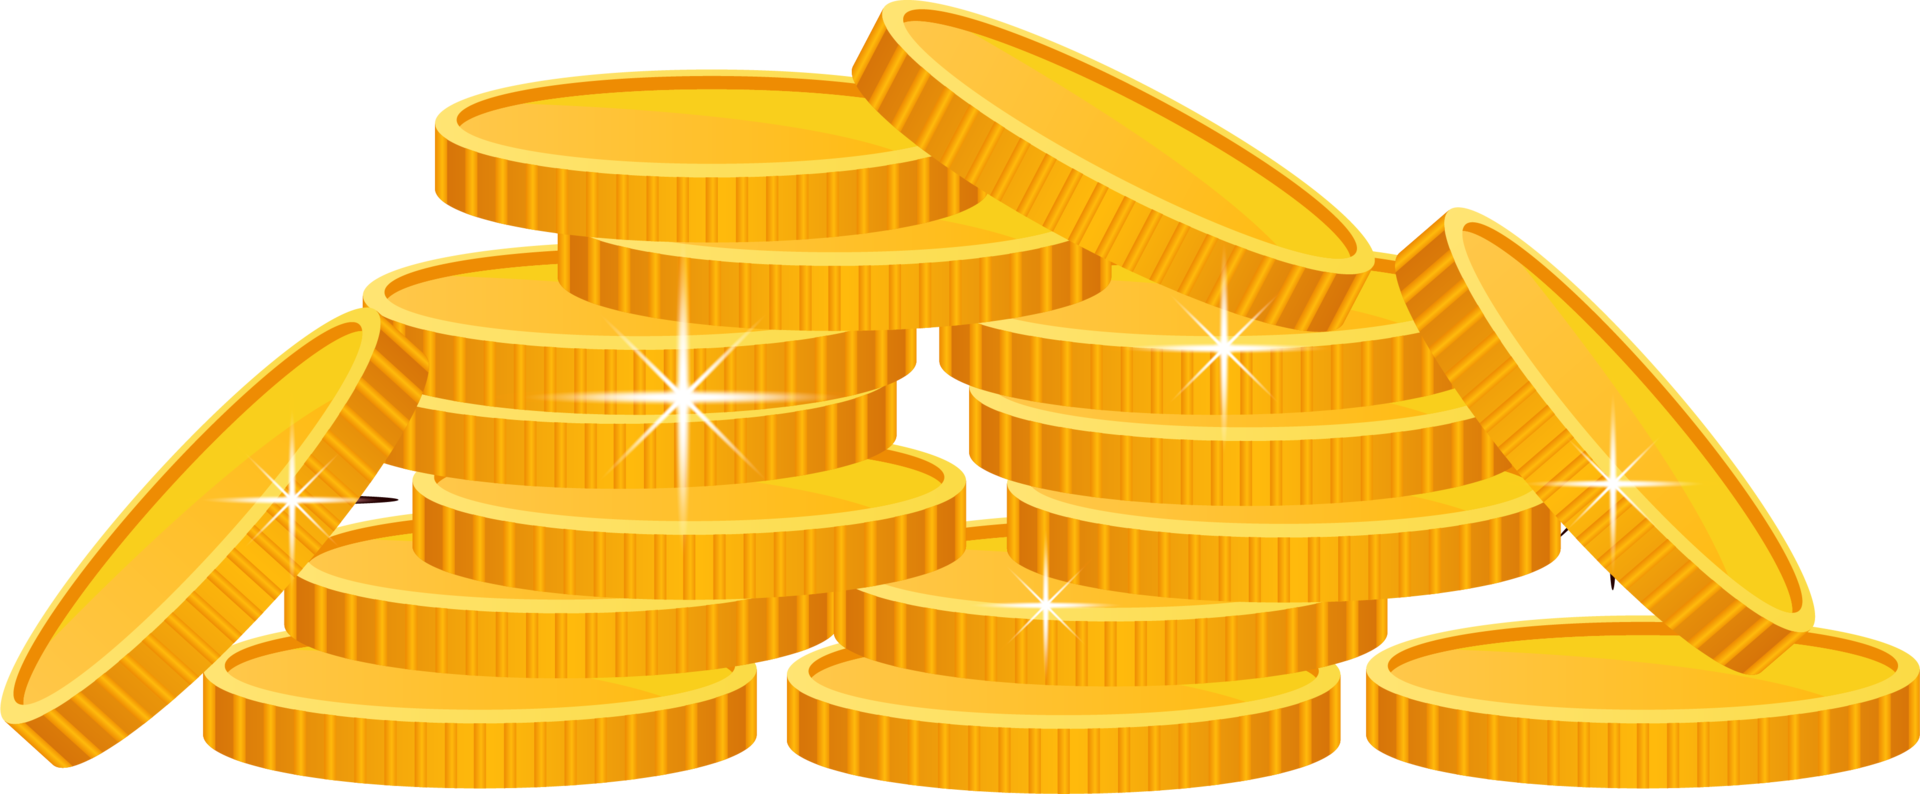 Gold Coin Pngs For Free Download